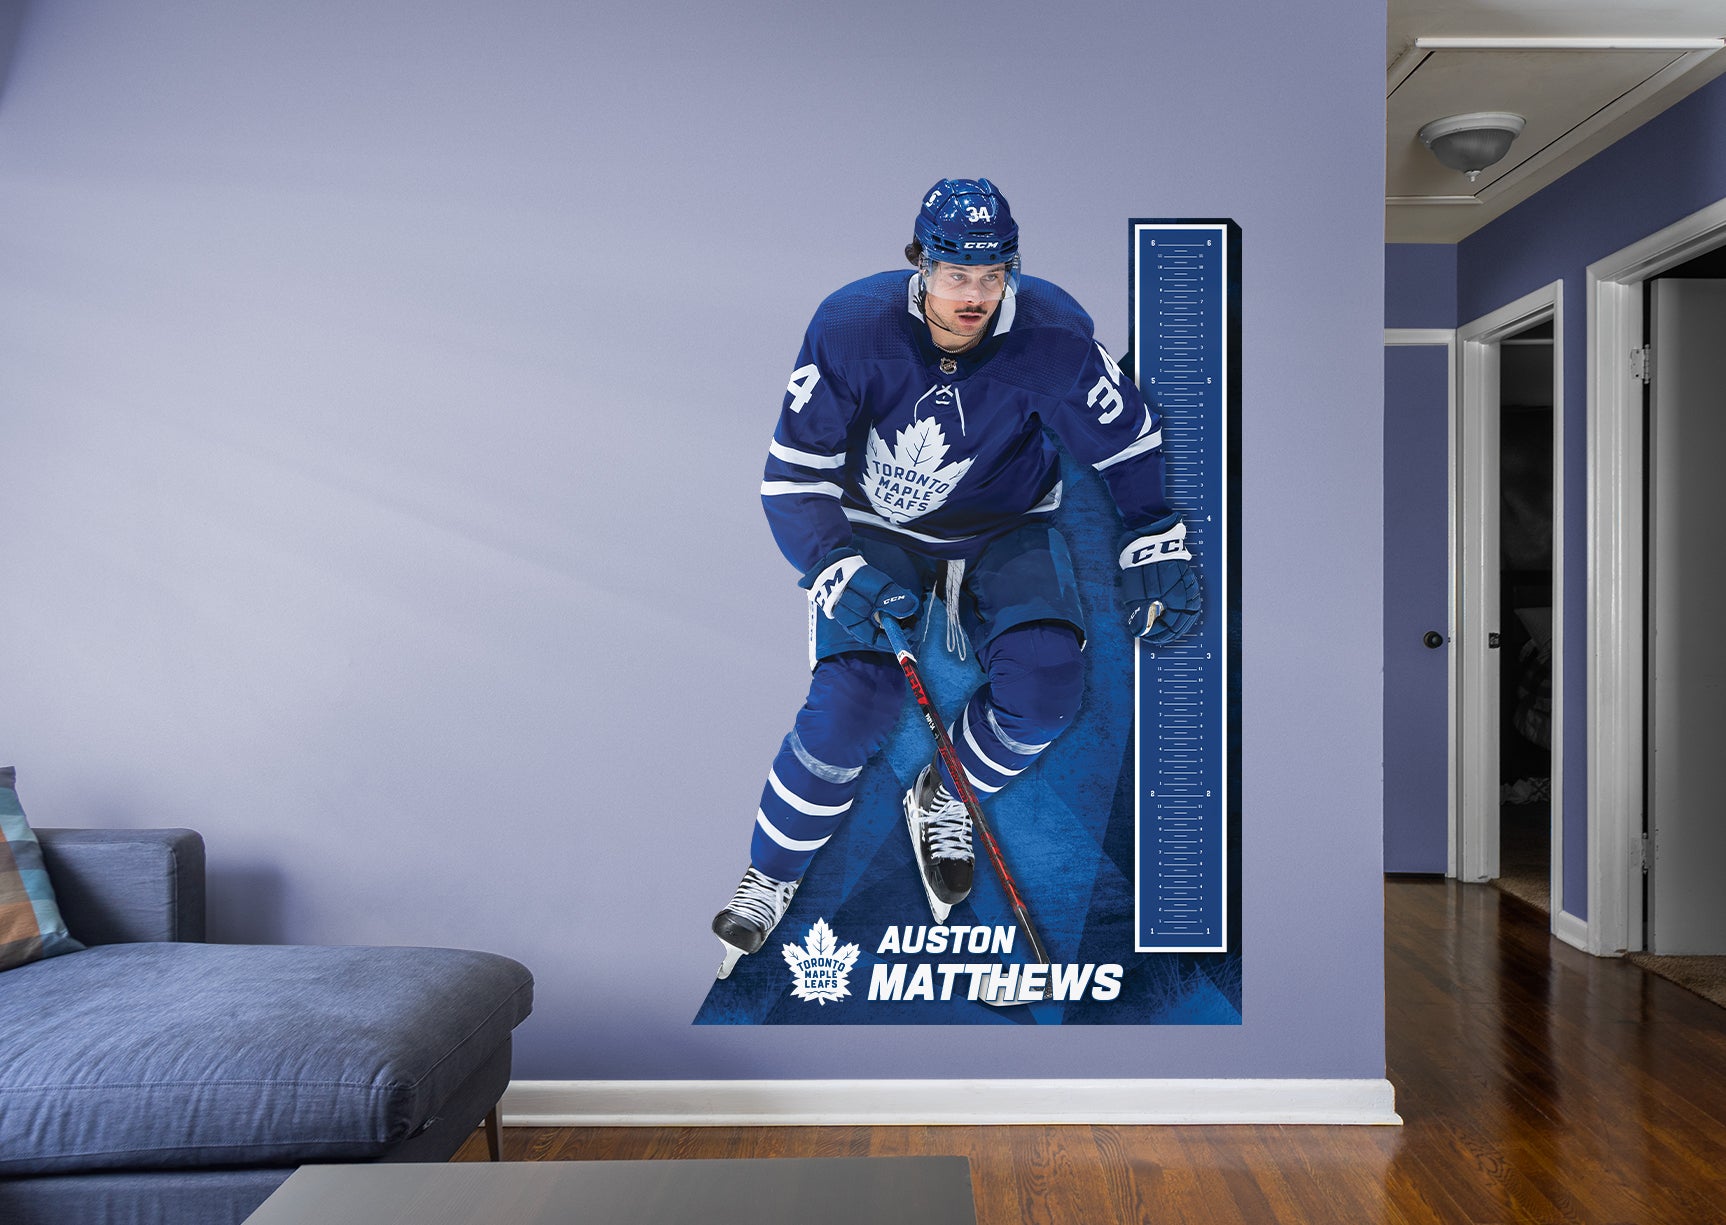 Toronto Maple Leafs Auston Matthews 2021 Reverse Retro - NHL Removable Wall Adhesive Wall Decal Life-Size Athlete +2 Wall Decals 76W x 72H